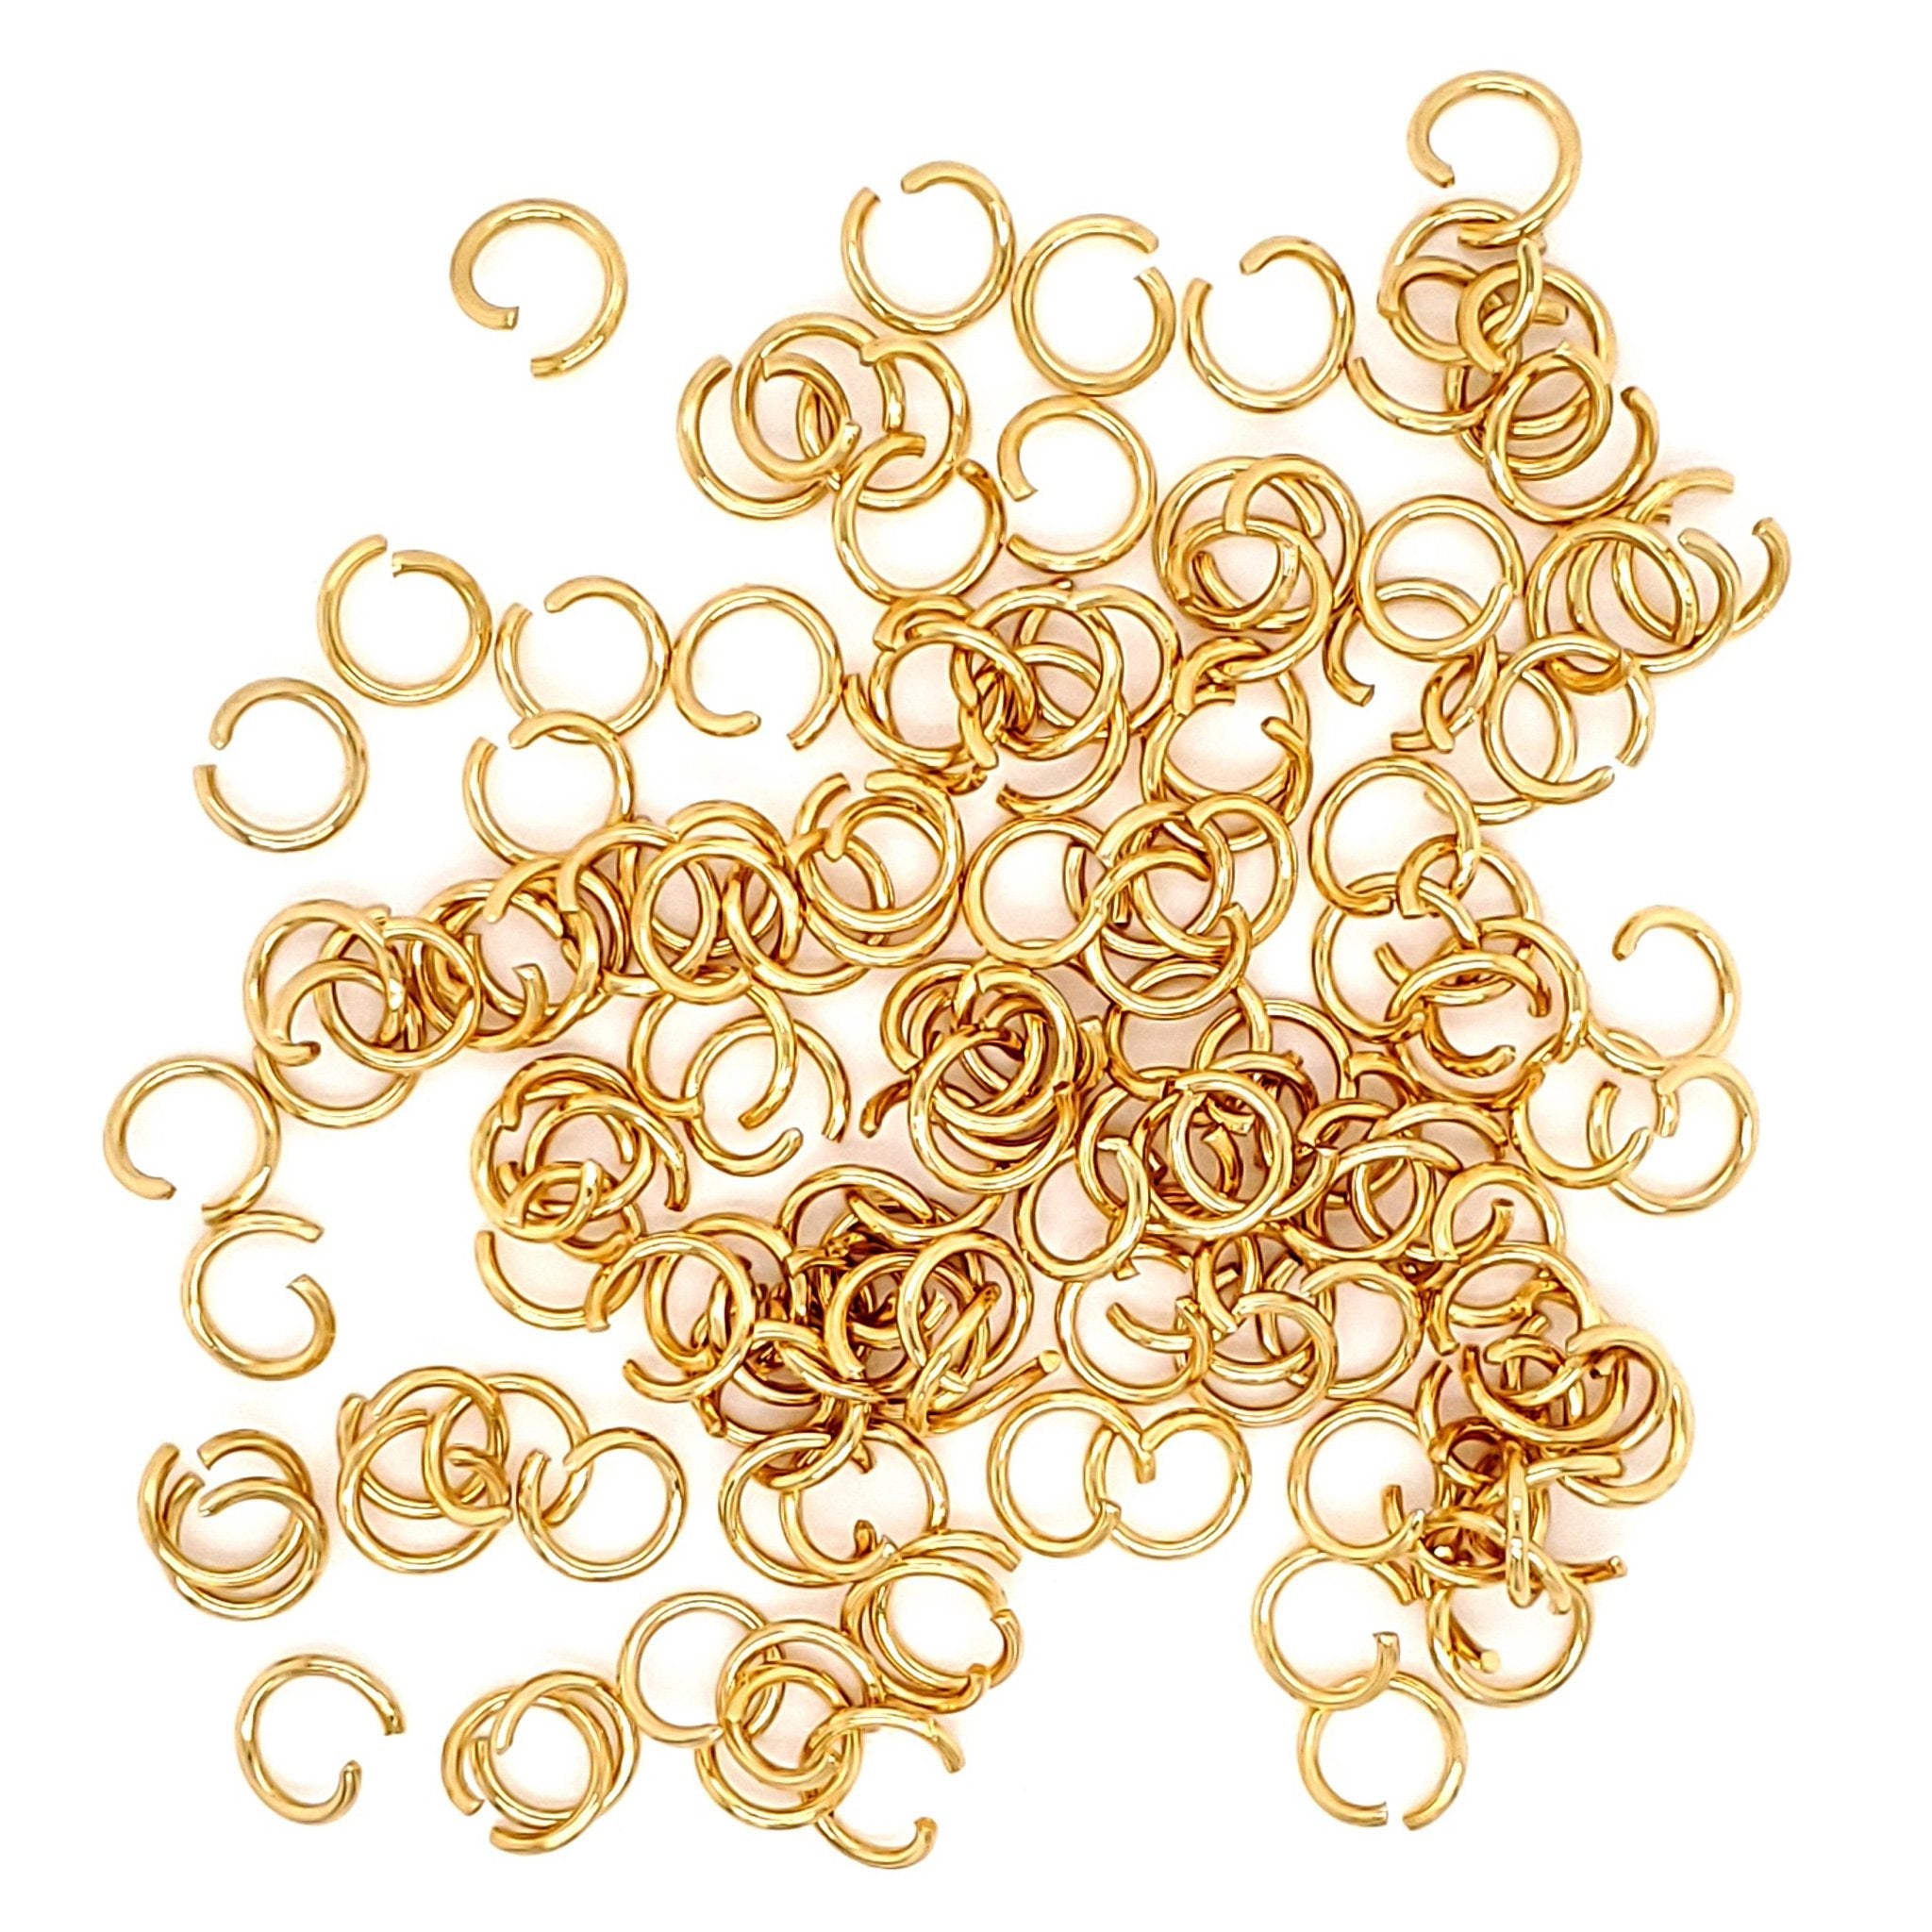 6mm 18K Gold Plated Stainless Steel Jump Rings, Open Jump Rings, 20 Gauge  Jump Rings, Bulk Gold Jump Rings, Jewelry Findings